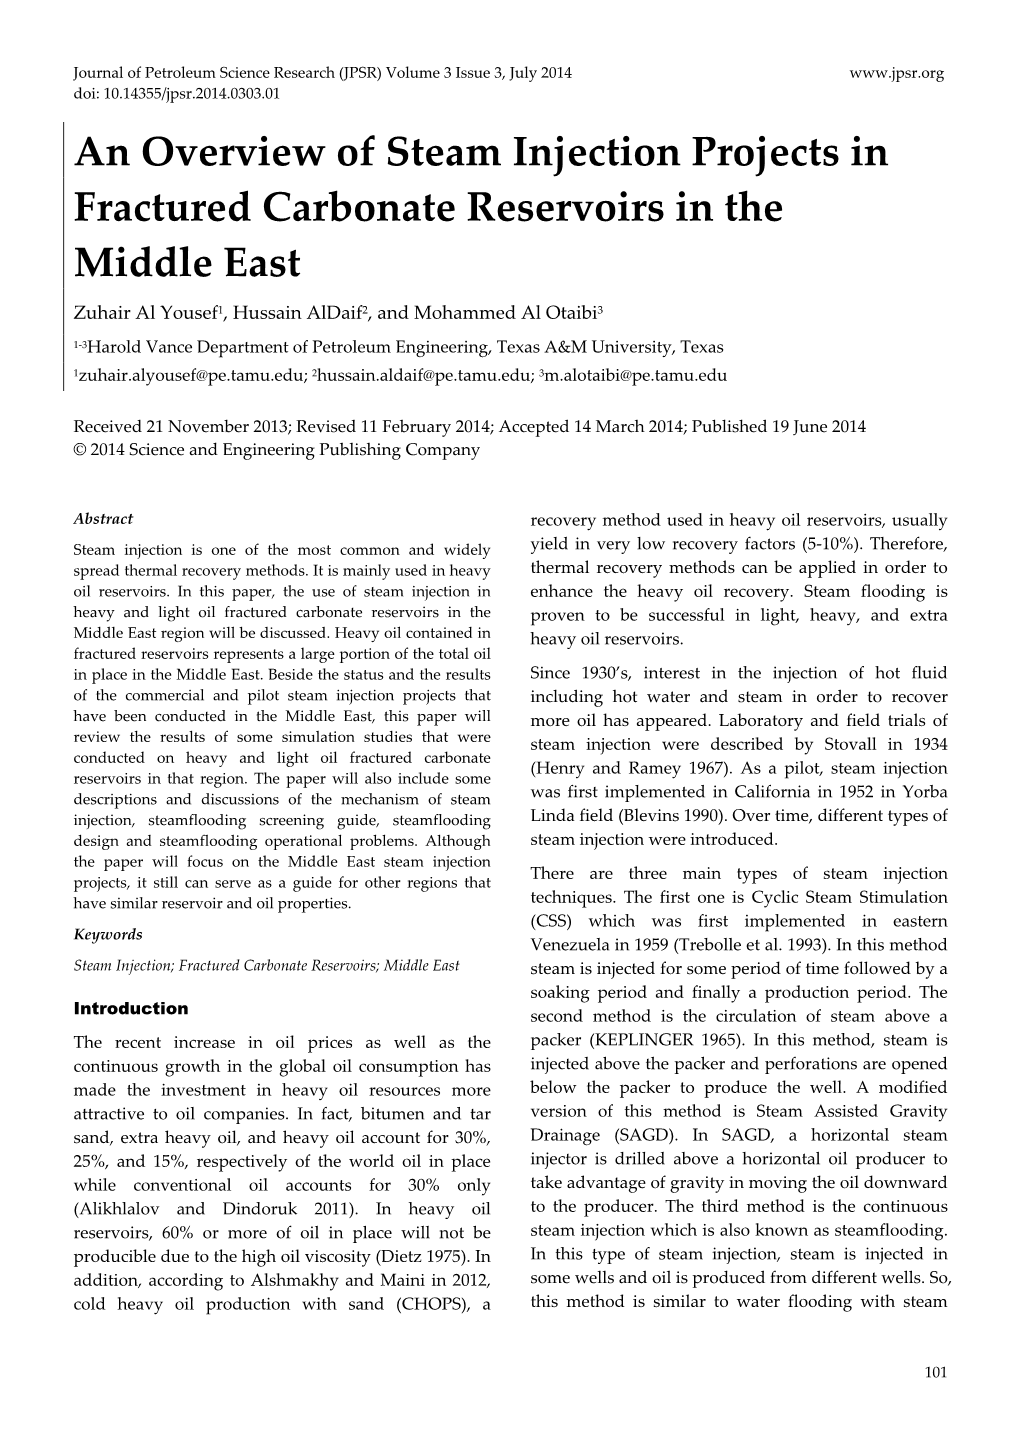 An Overview of Steam Injection Projects in Fractured Carbonate Reservoirs in the Middle East Zuhair Al Yousef1, Hussain Aldaif2, and Mohammed Al Otaibi3